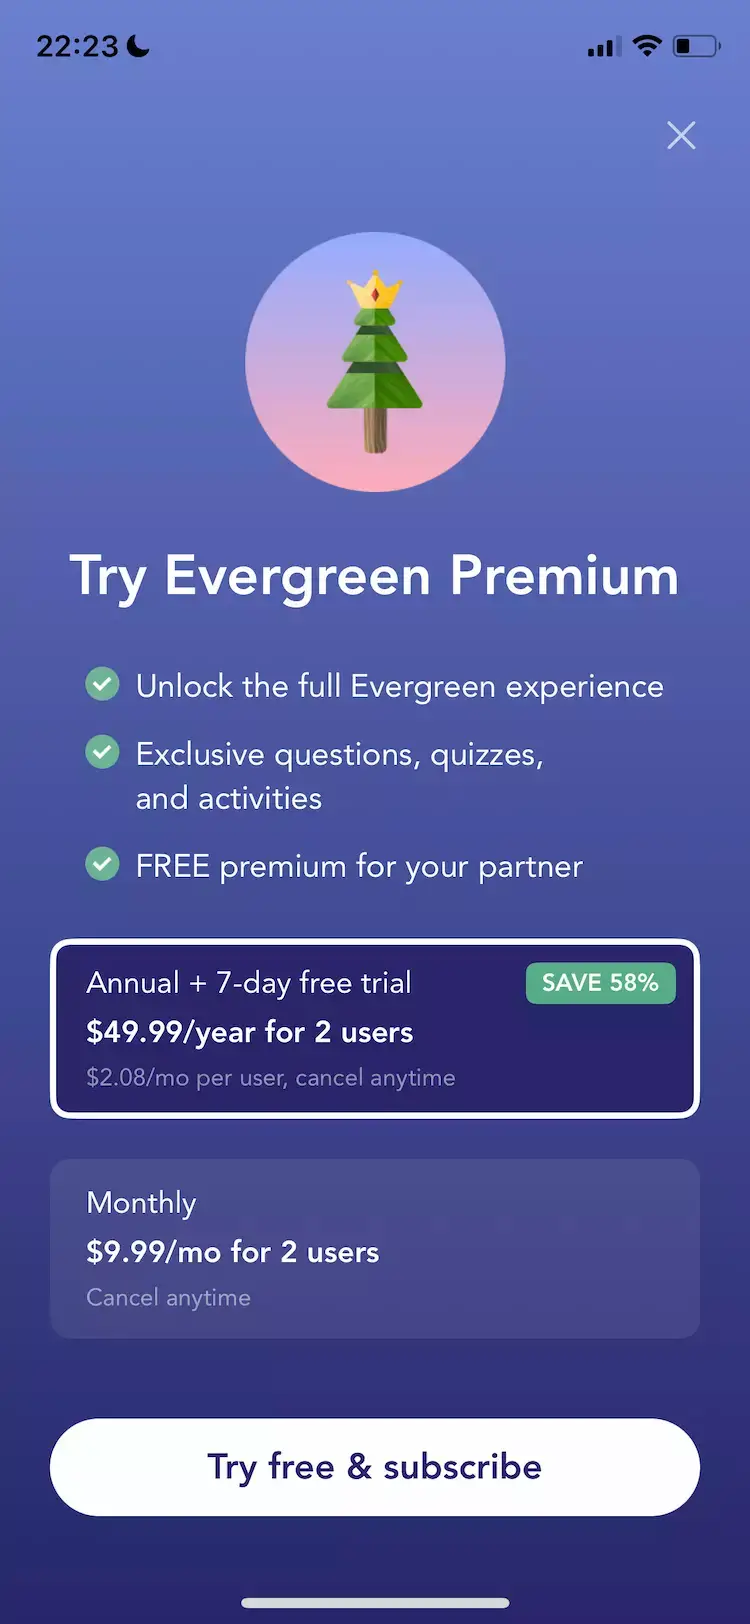 A mobile paywall design example by Evergreen: Relationship Growth from the Health & Fitness category